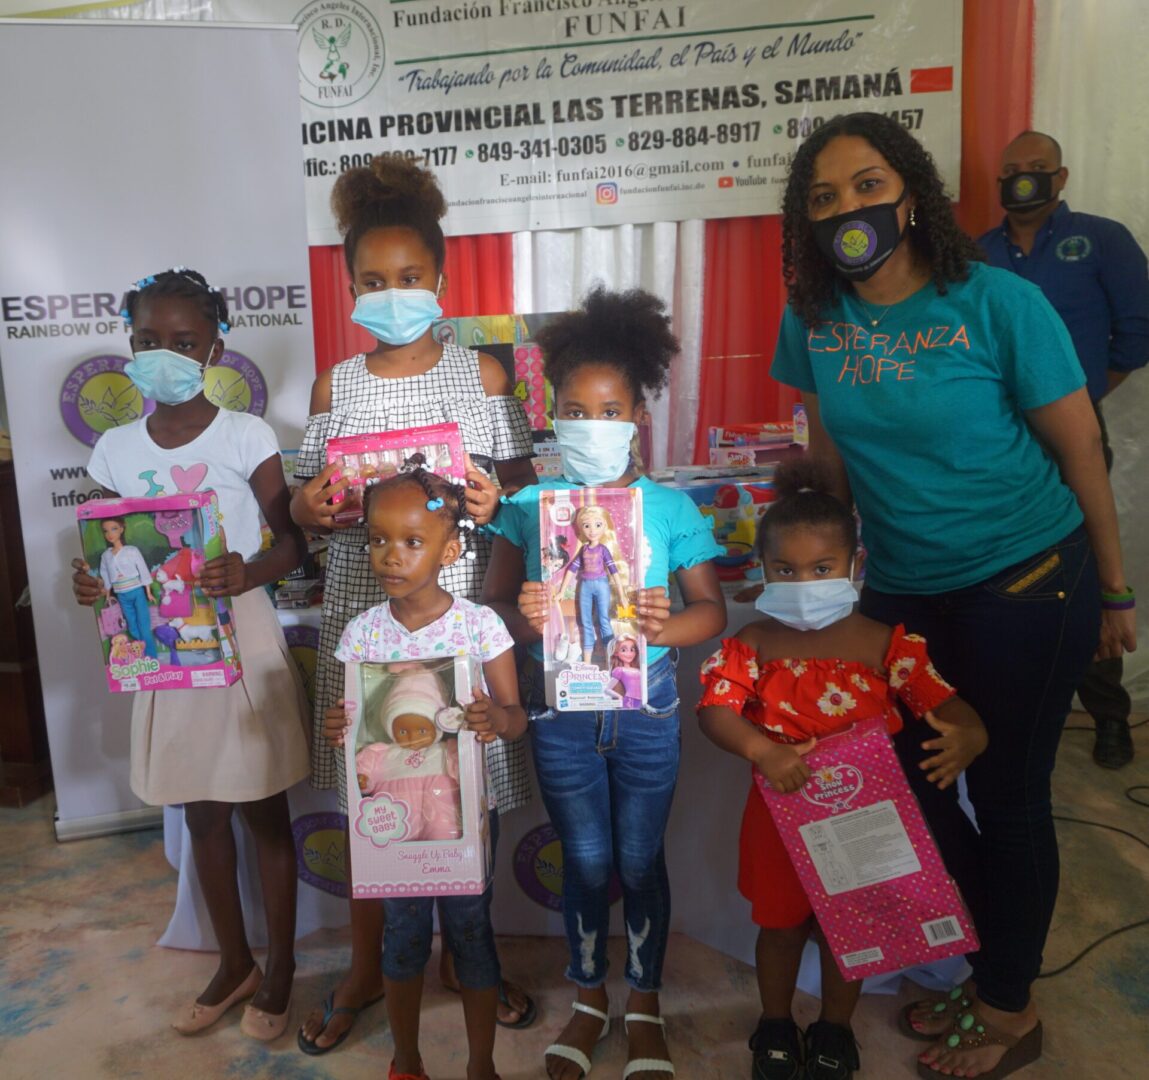 Our staff and five girls, each child holding a boxed toy